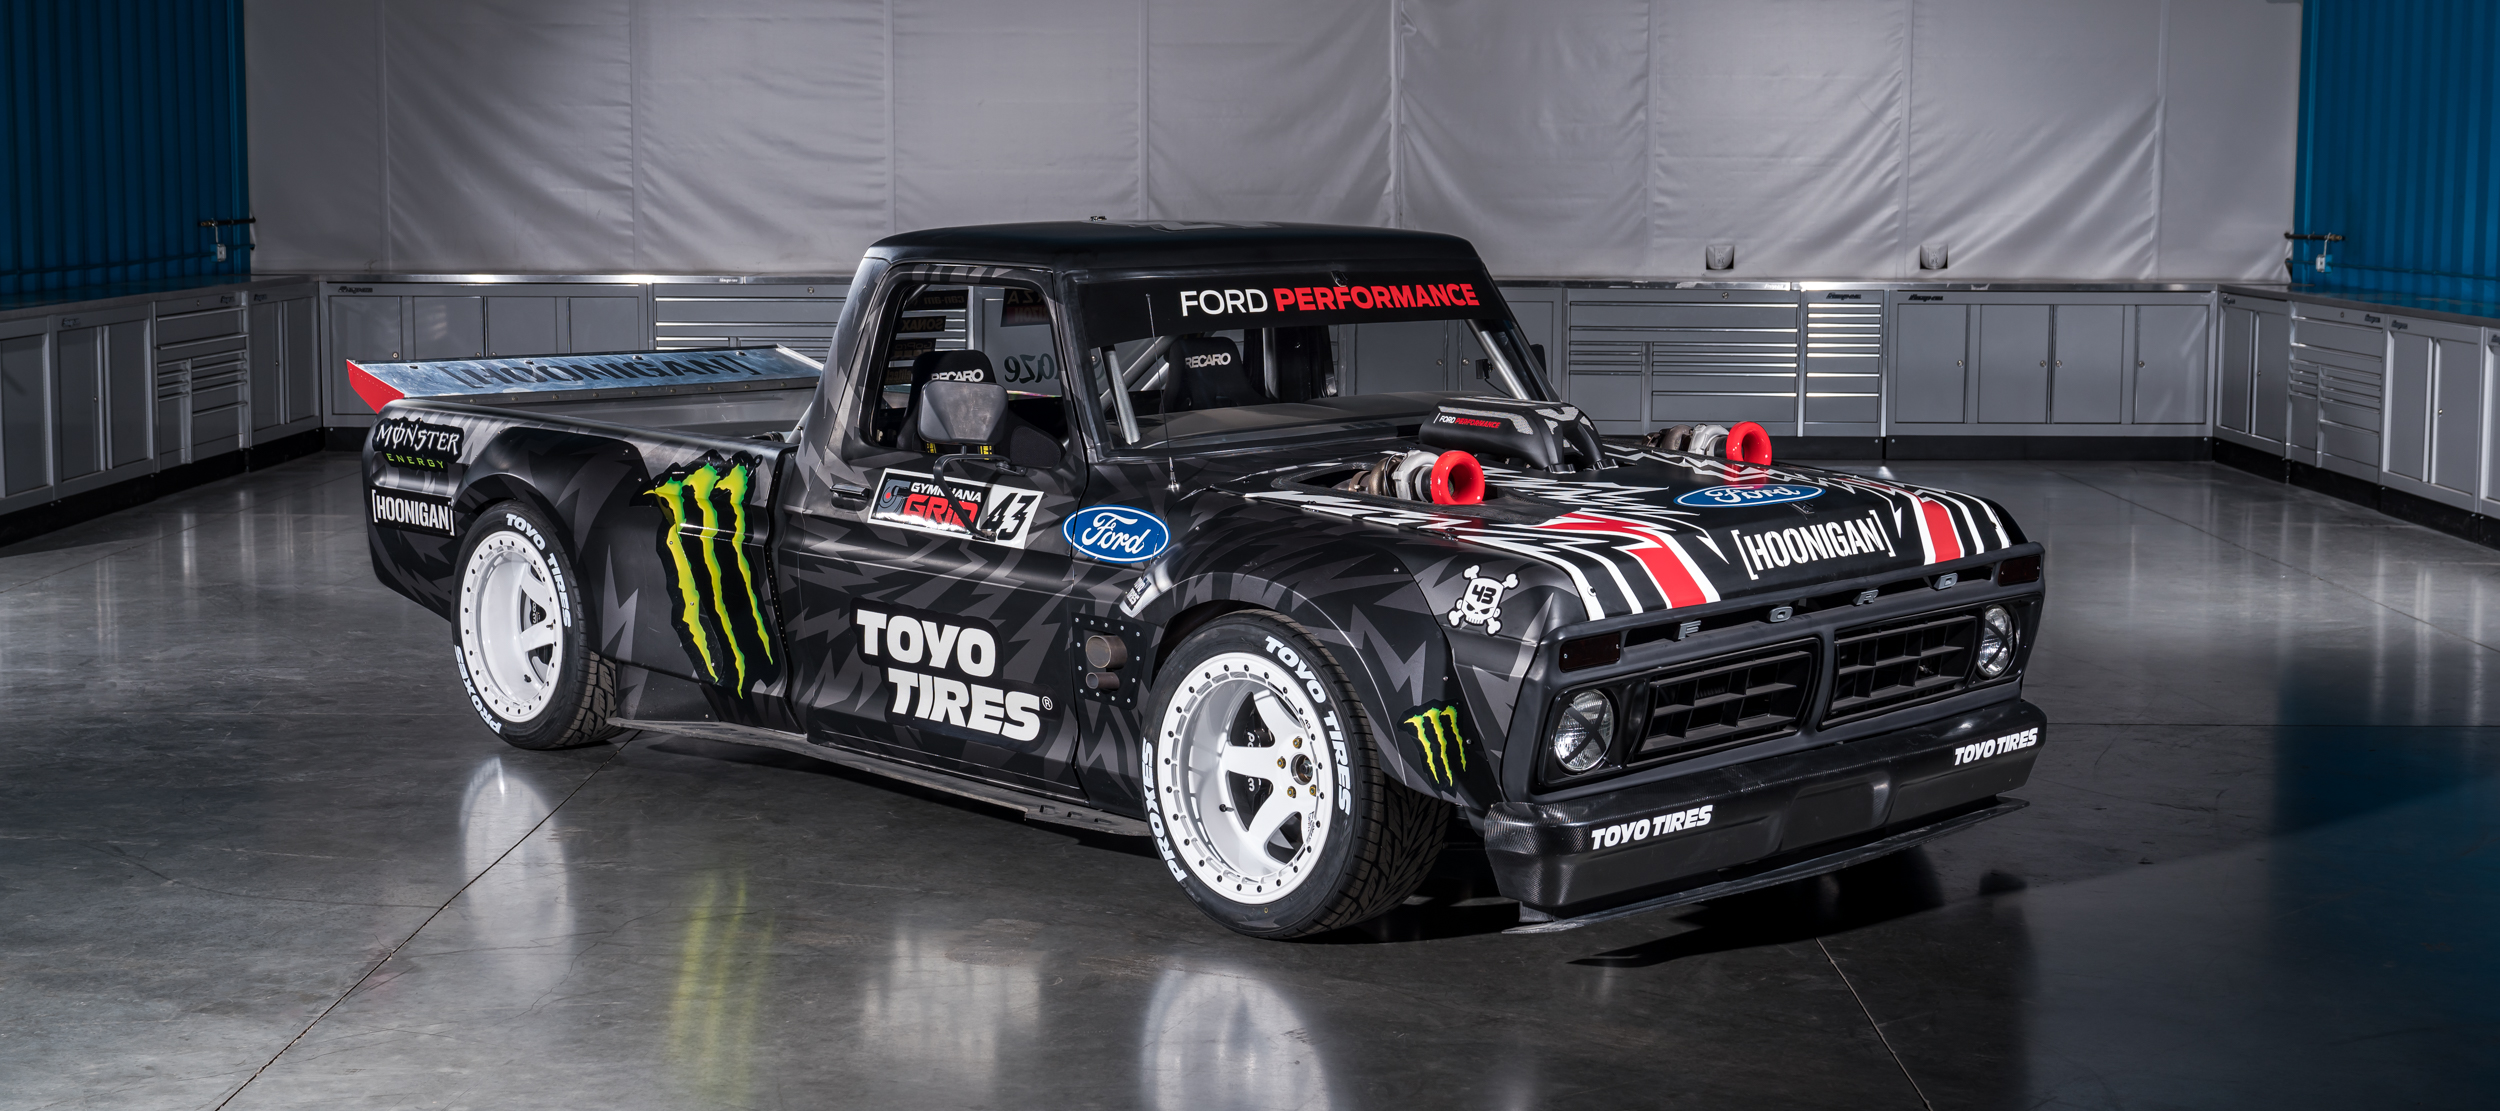 The Ken Block Collection